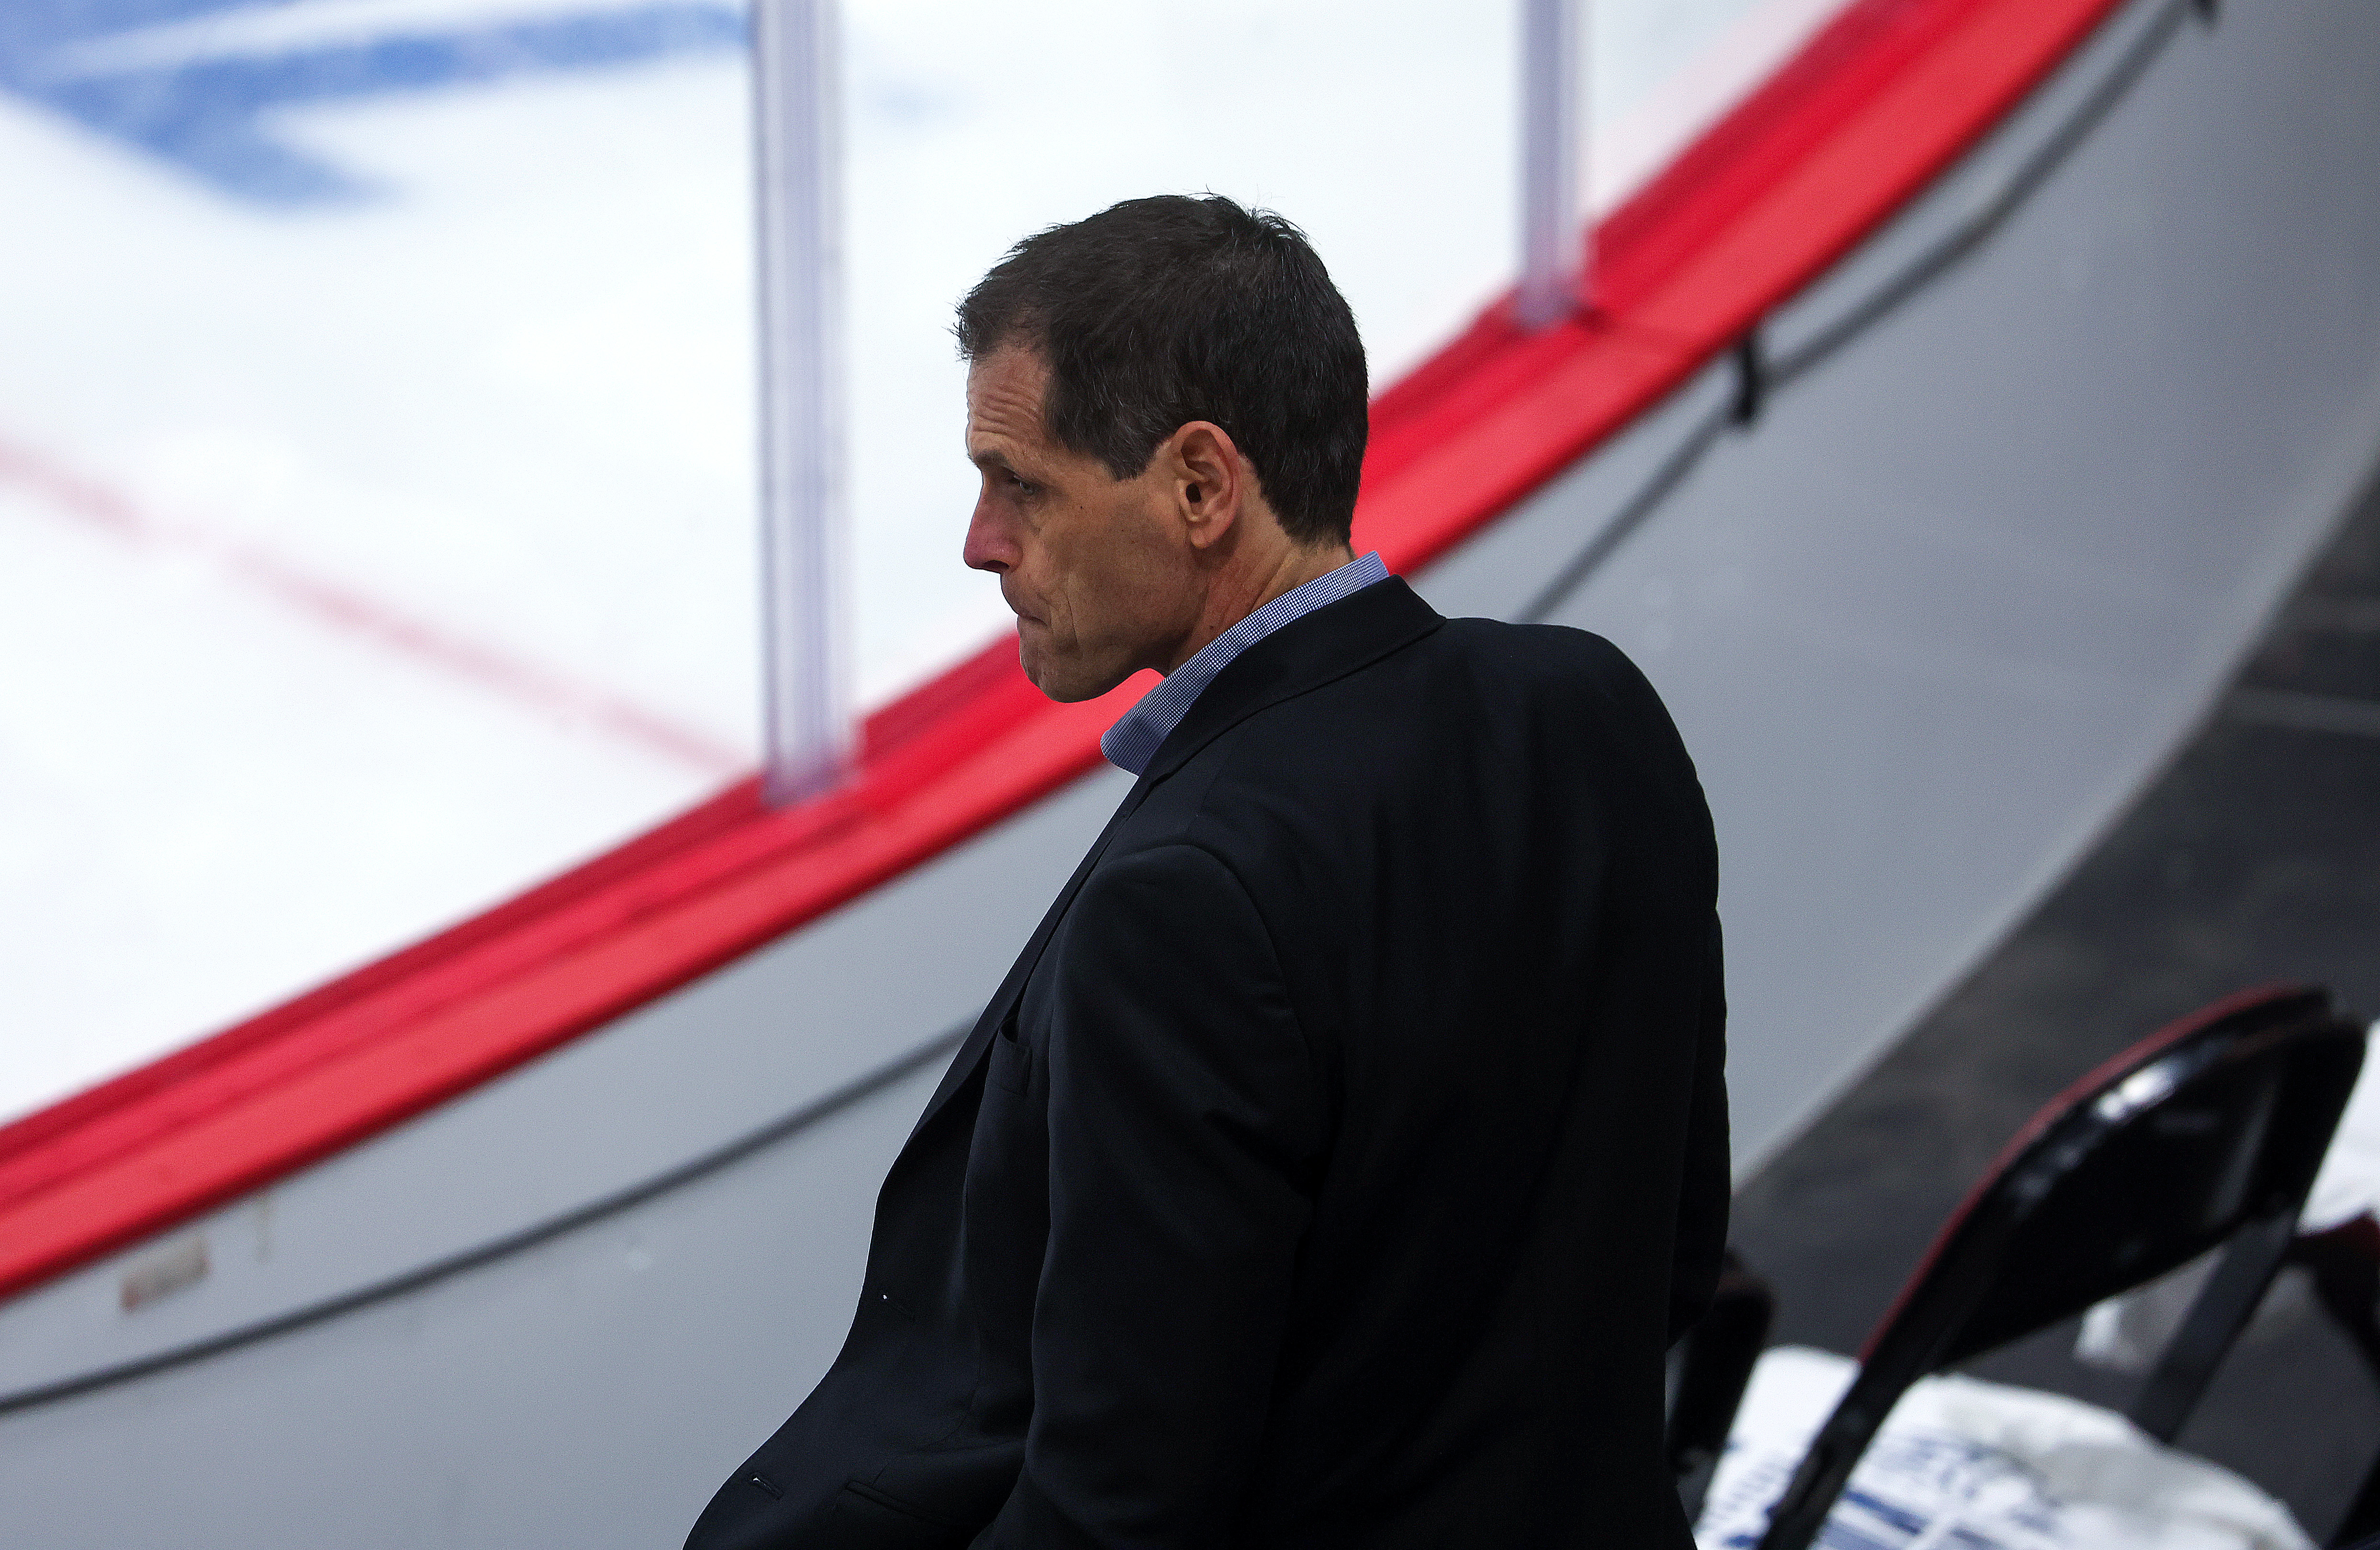 What's next for the Bruins after their shocking early exit from